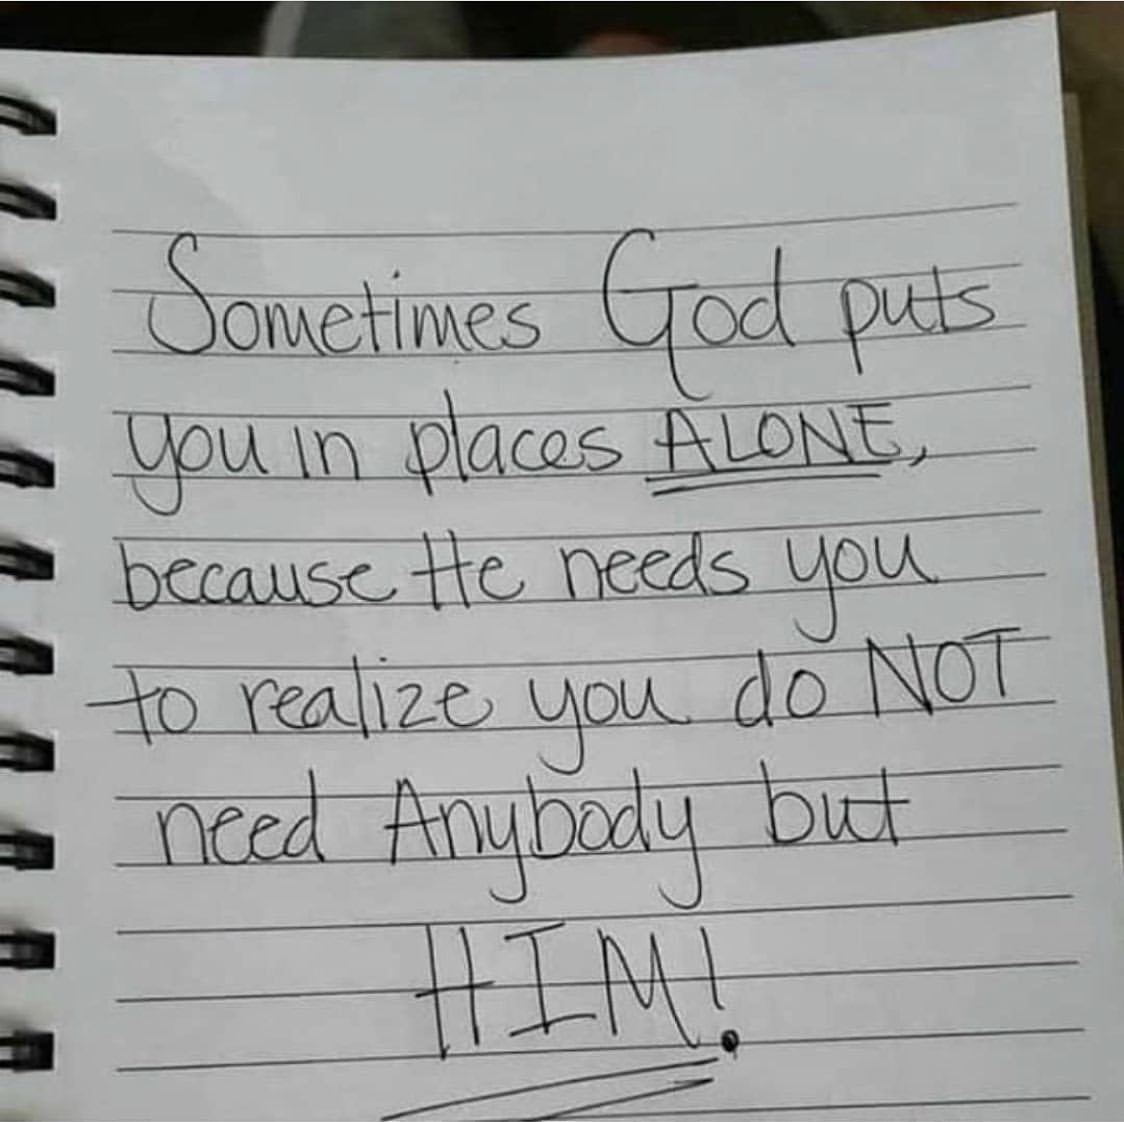 Sometimes Good puts you in places alone, because he needs you to realize you do not need anybody but him.